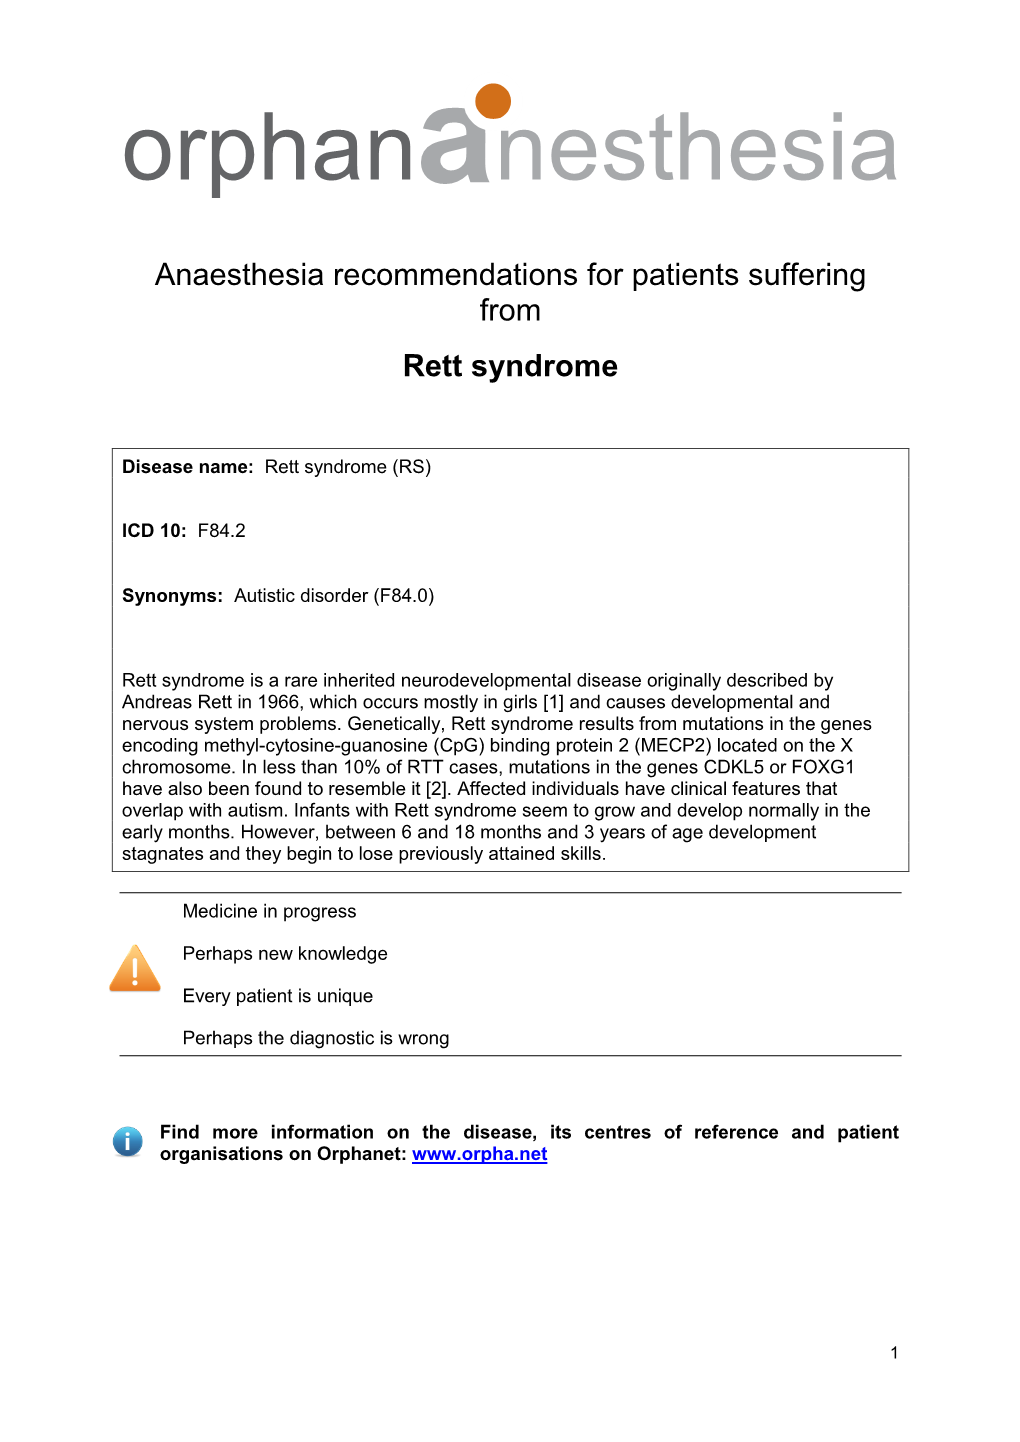 Anaesthesia Recommendations for Patients Suffering from Rett Syndrome